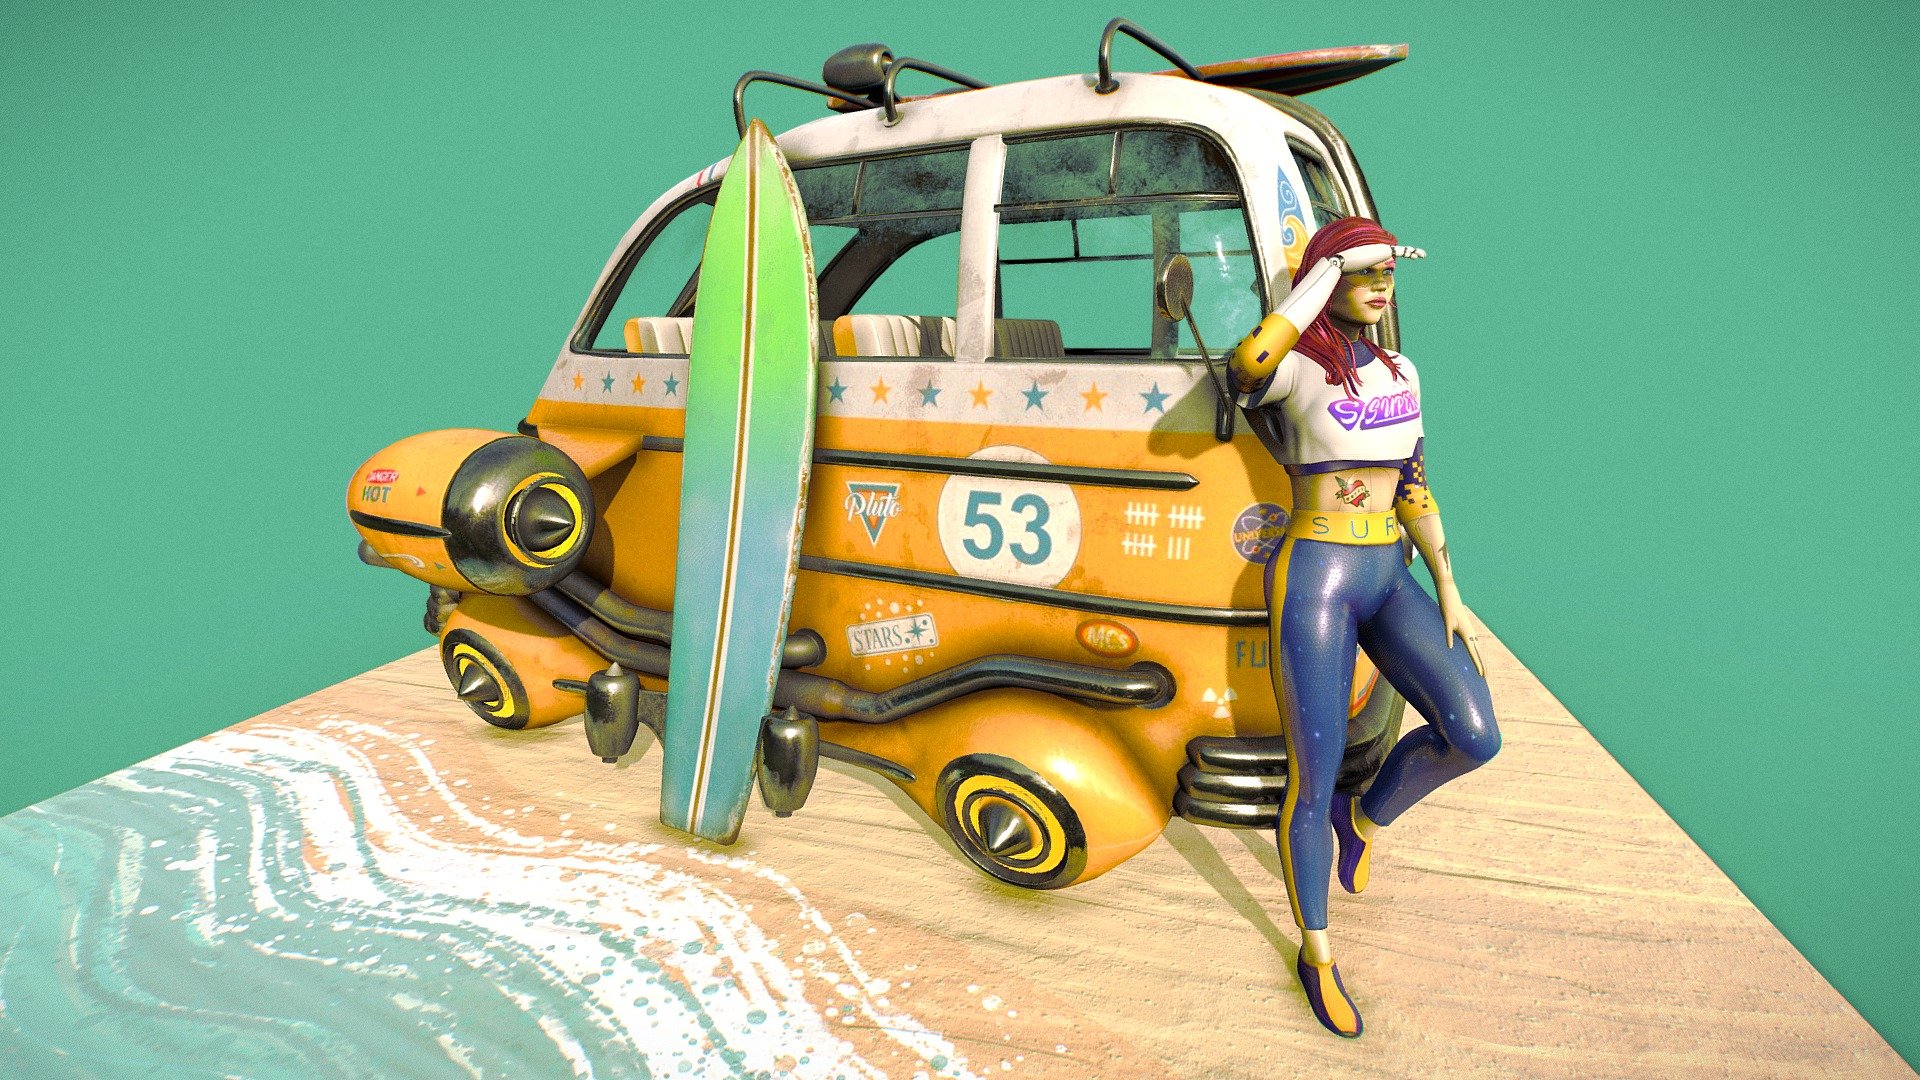 Cyberpunk scene with a surfer waiting beside her ban, for the perfect wave. It is a stylelife, it is her stylelife. She has surfed all over the galaxy and no needs of anyone to be the best.
Fbx scene with 3 different props (girl, ban and ground) with 4096 x 4096 textures 3d model